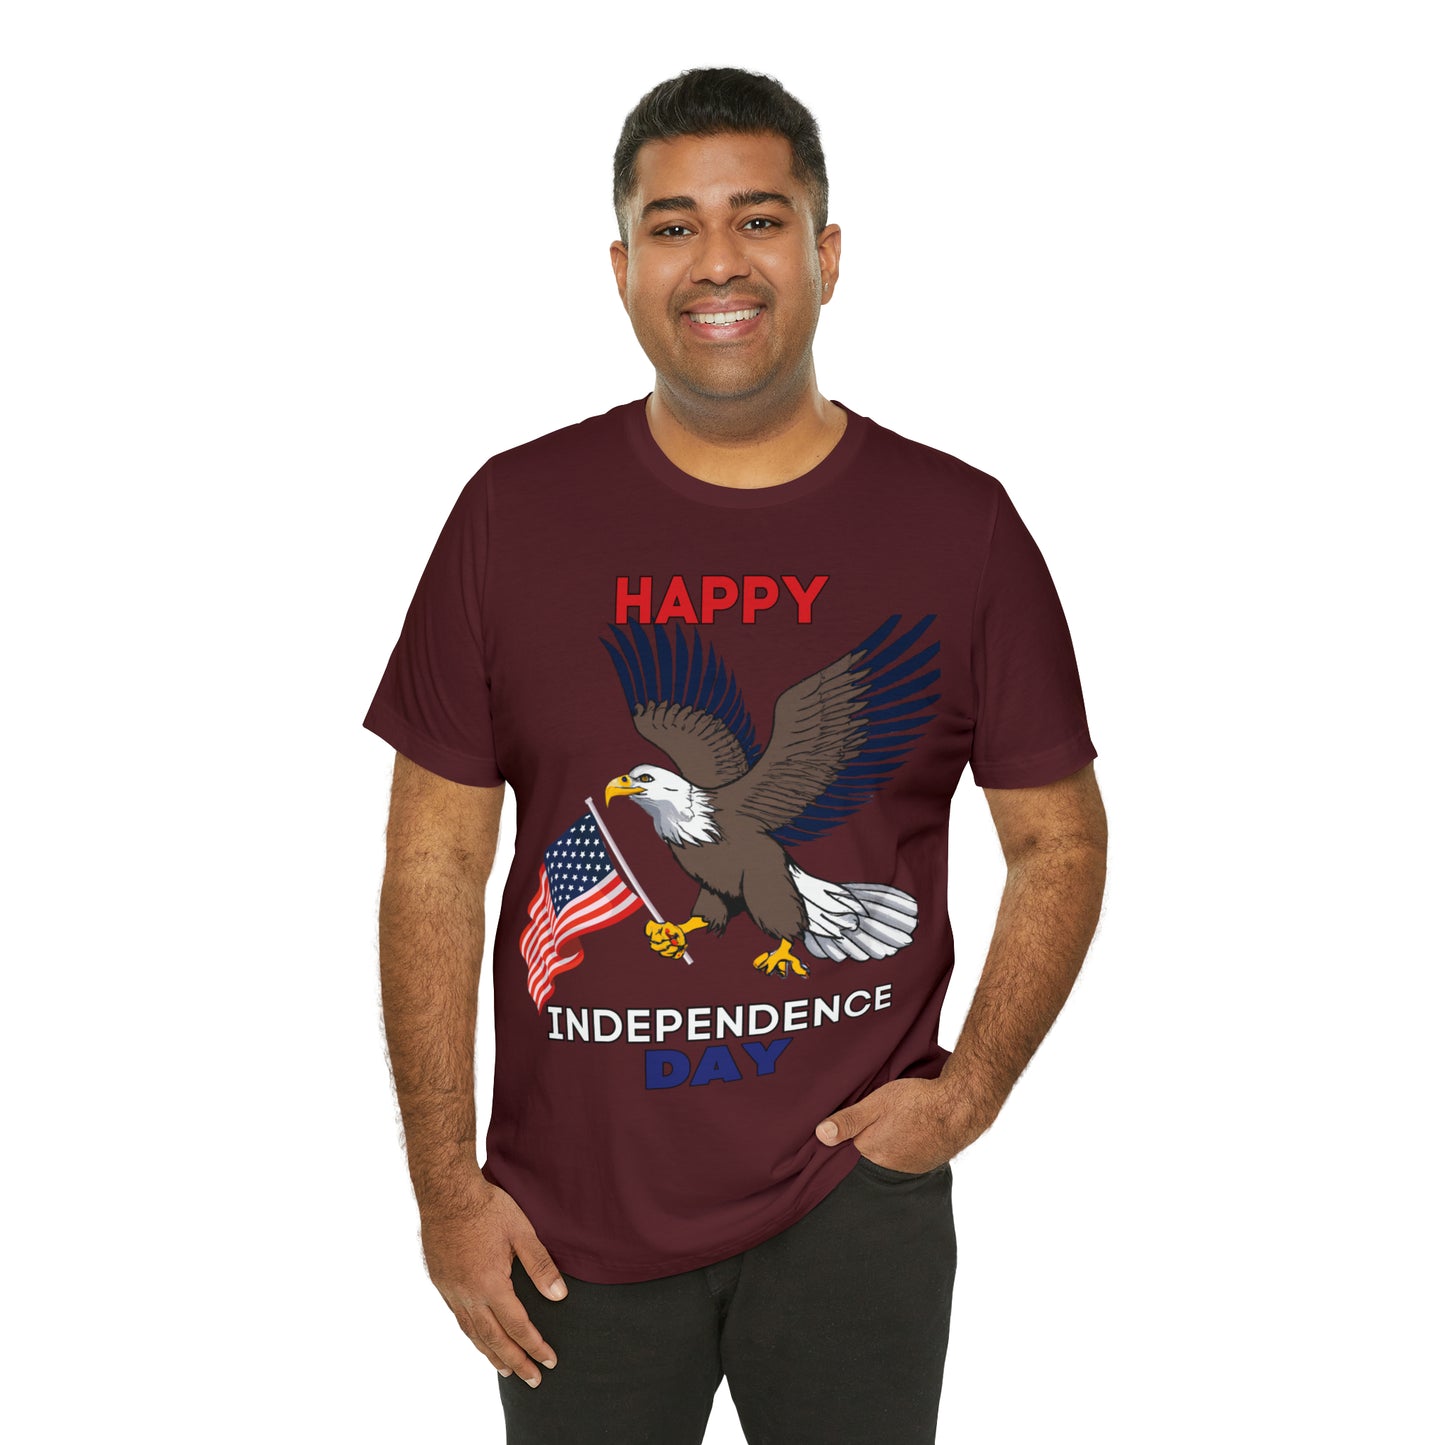 Show Your Patriotic Spirit with Happy Independence Day Shirts for Women and Men: 4th of July, USA Flag, Fireworks, Freedom, and More